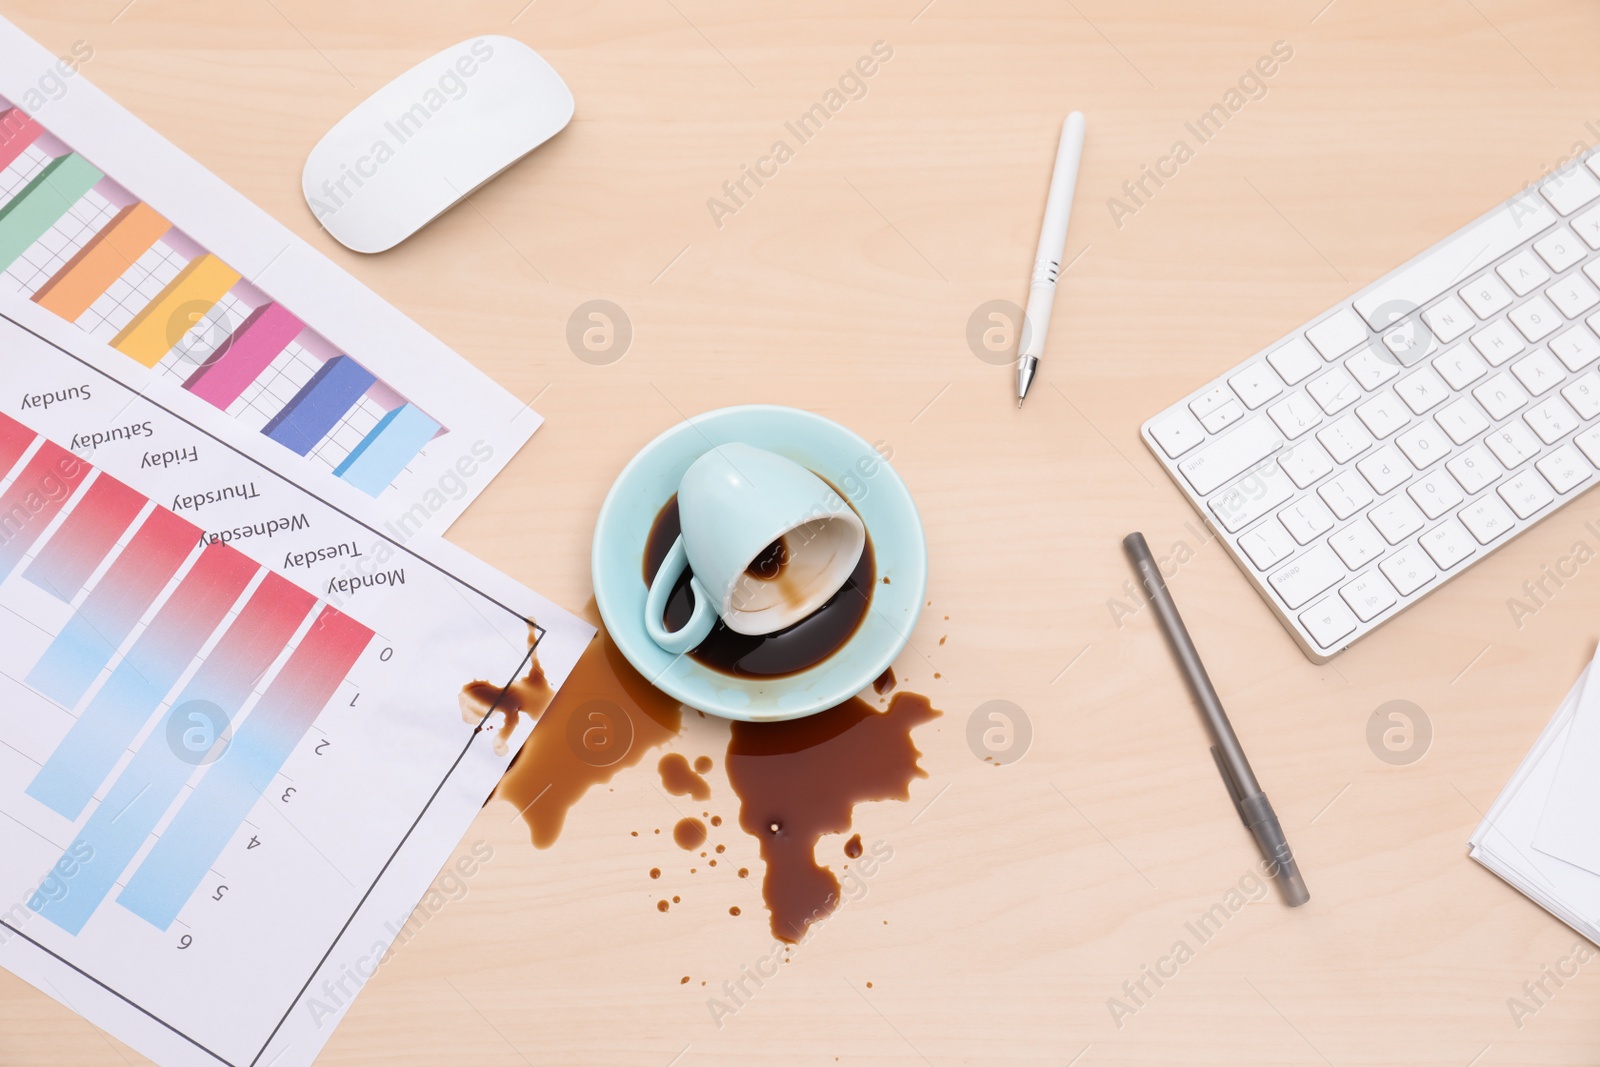 Photo of Cup with saucer and coffee spill on wooden office desk, flat lay